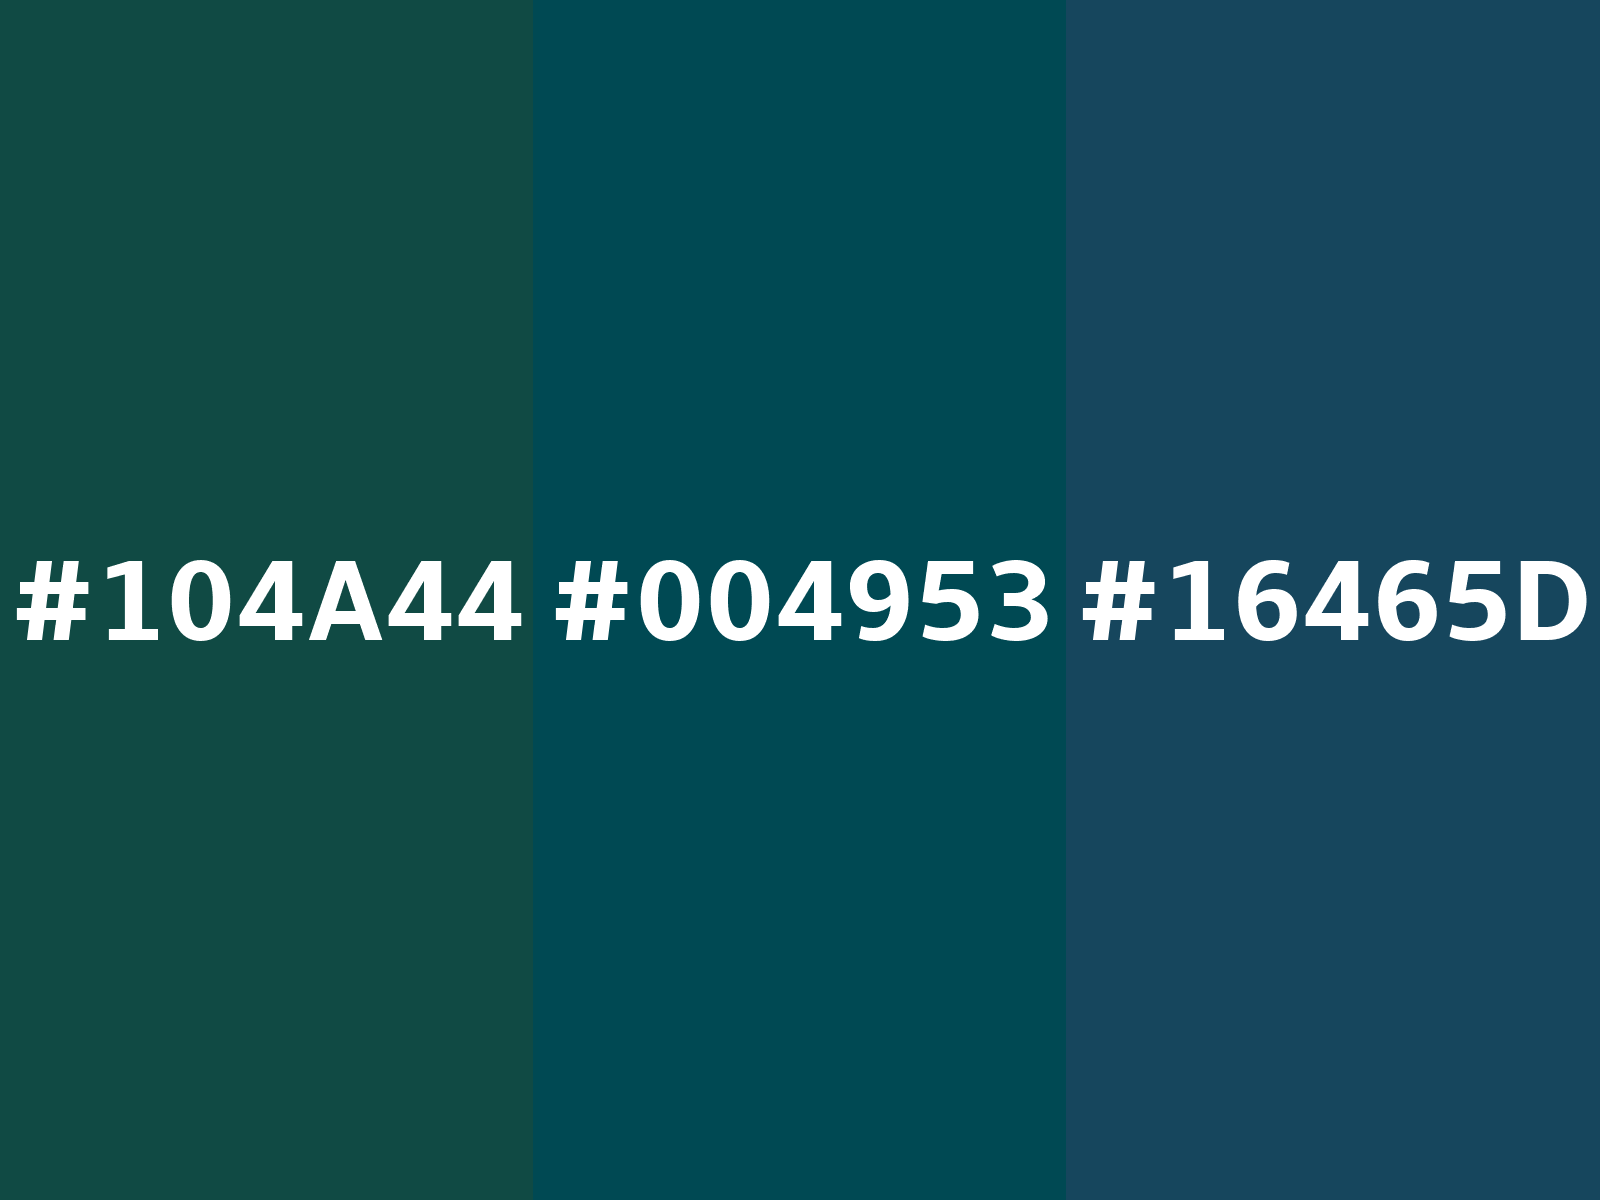 Converting Colors - Midnight green (eagle green)